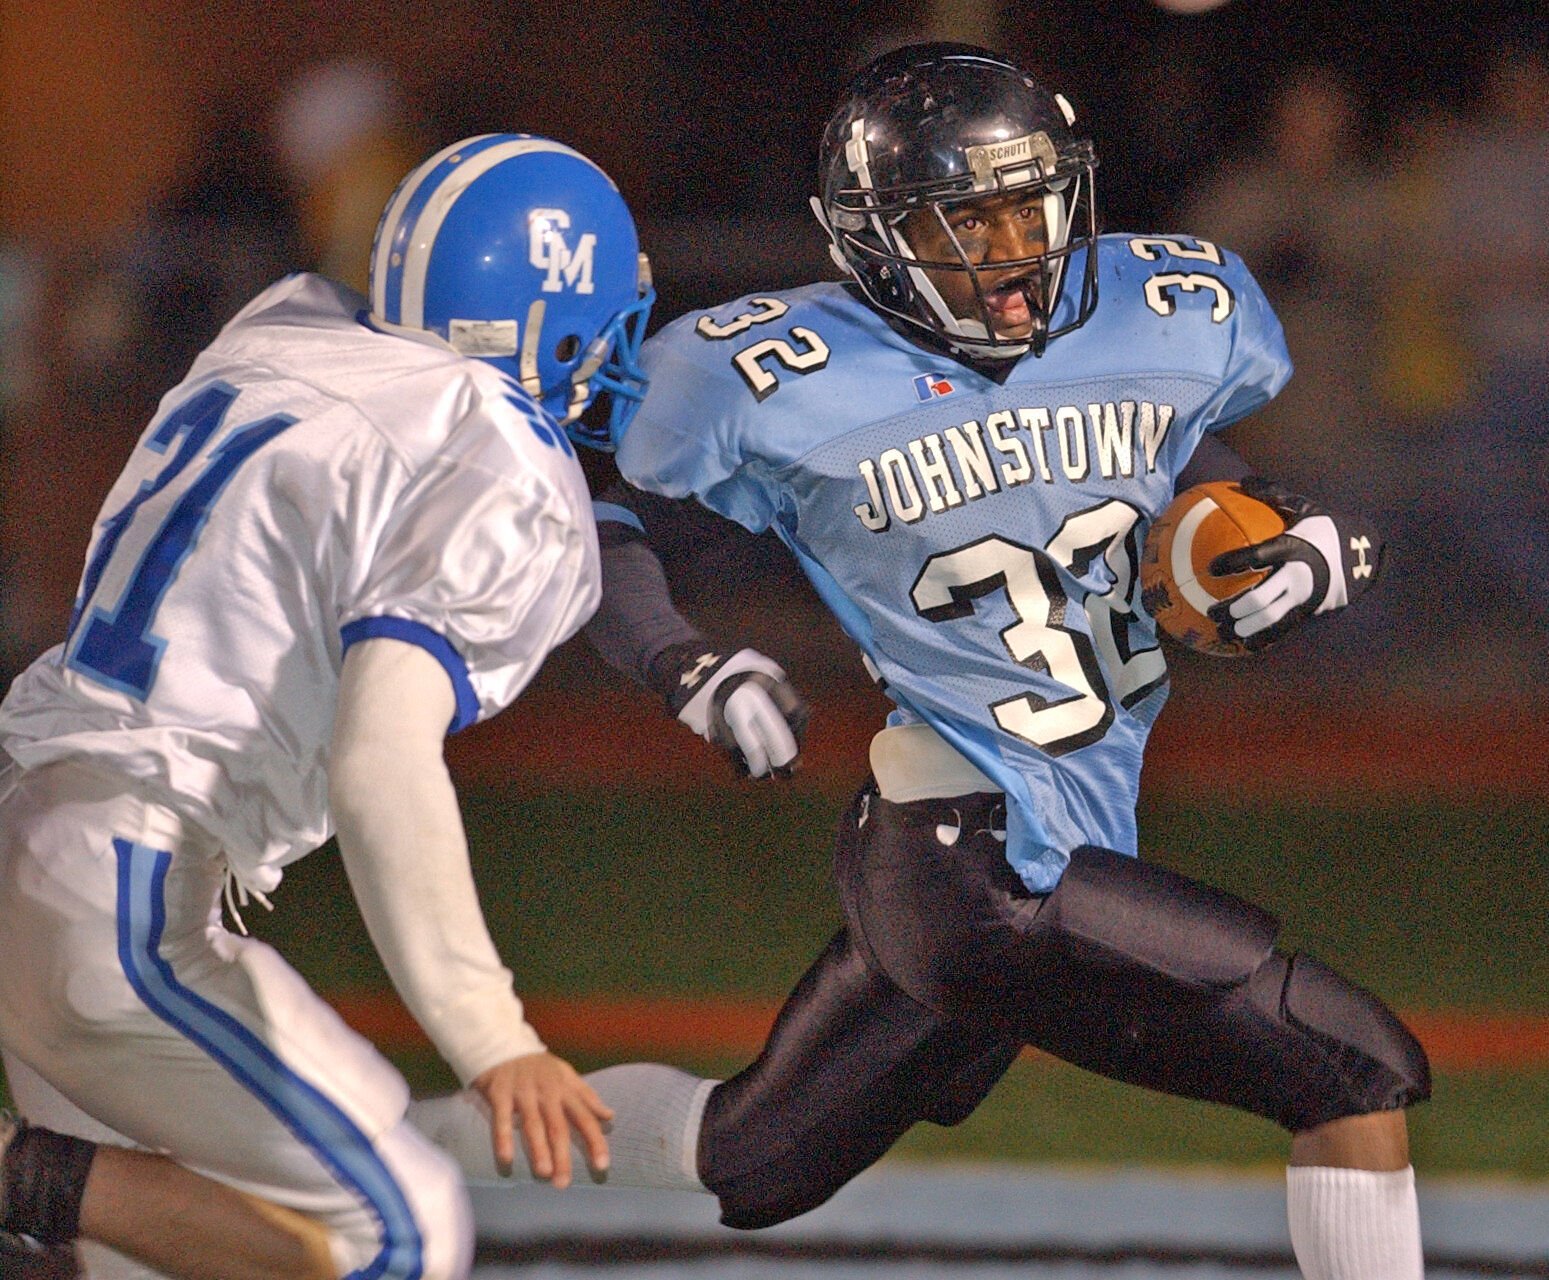 LaRod Stephens-Howling surpasses 1,000 rushing yards in just five games during the 2003 season